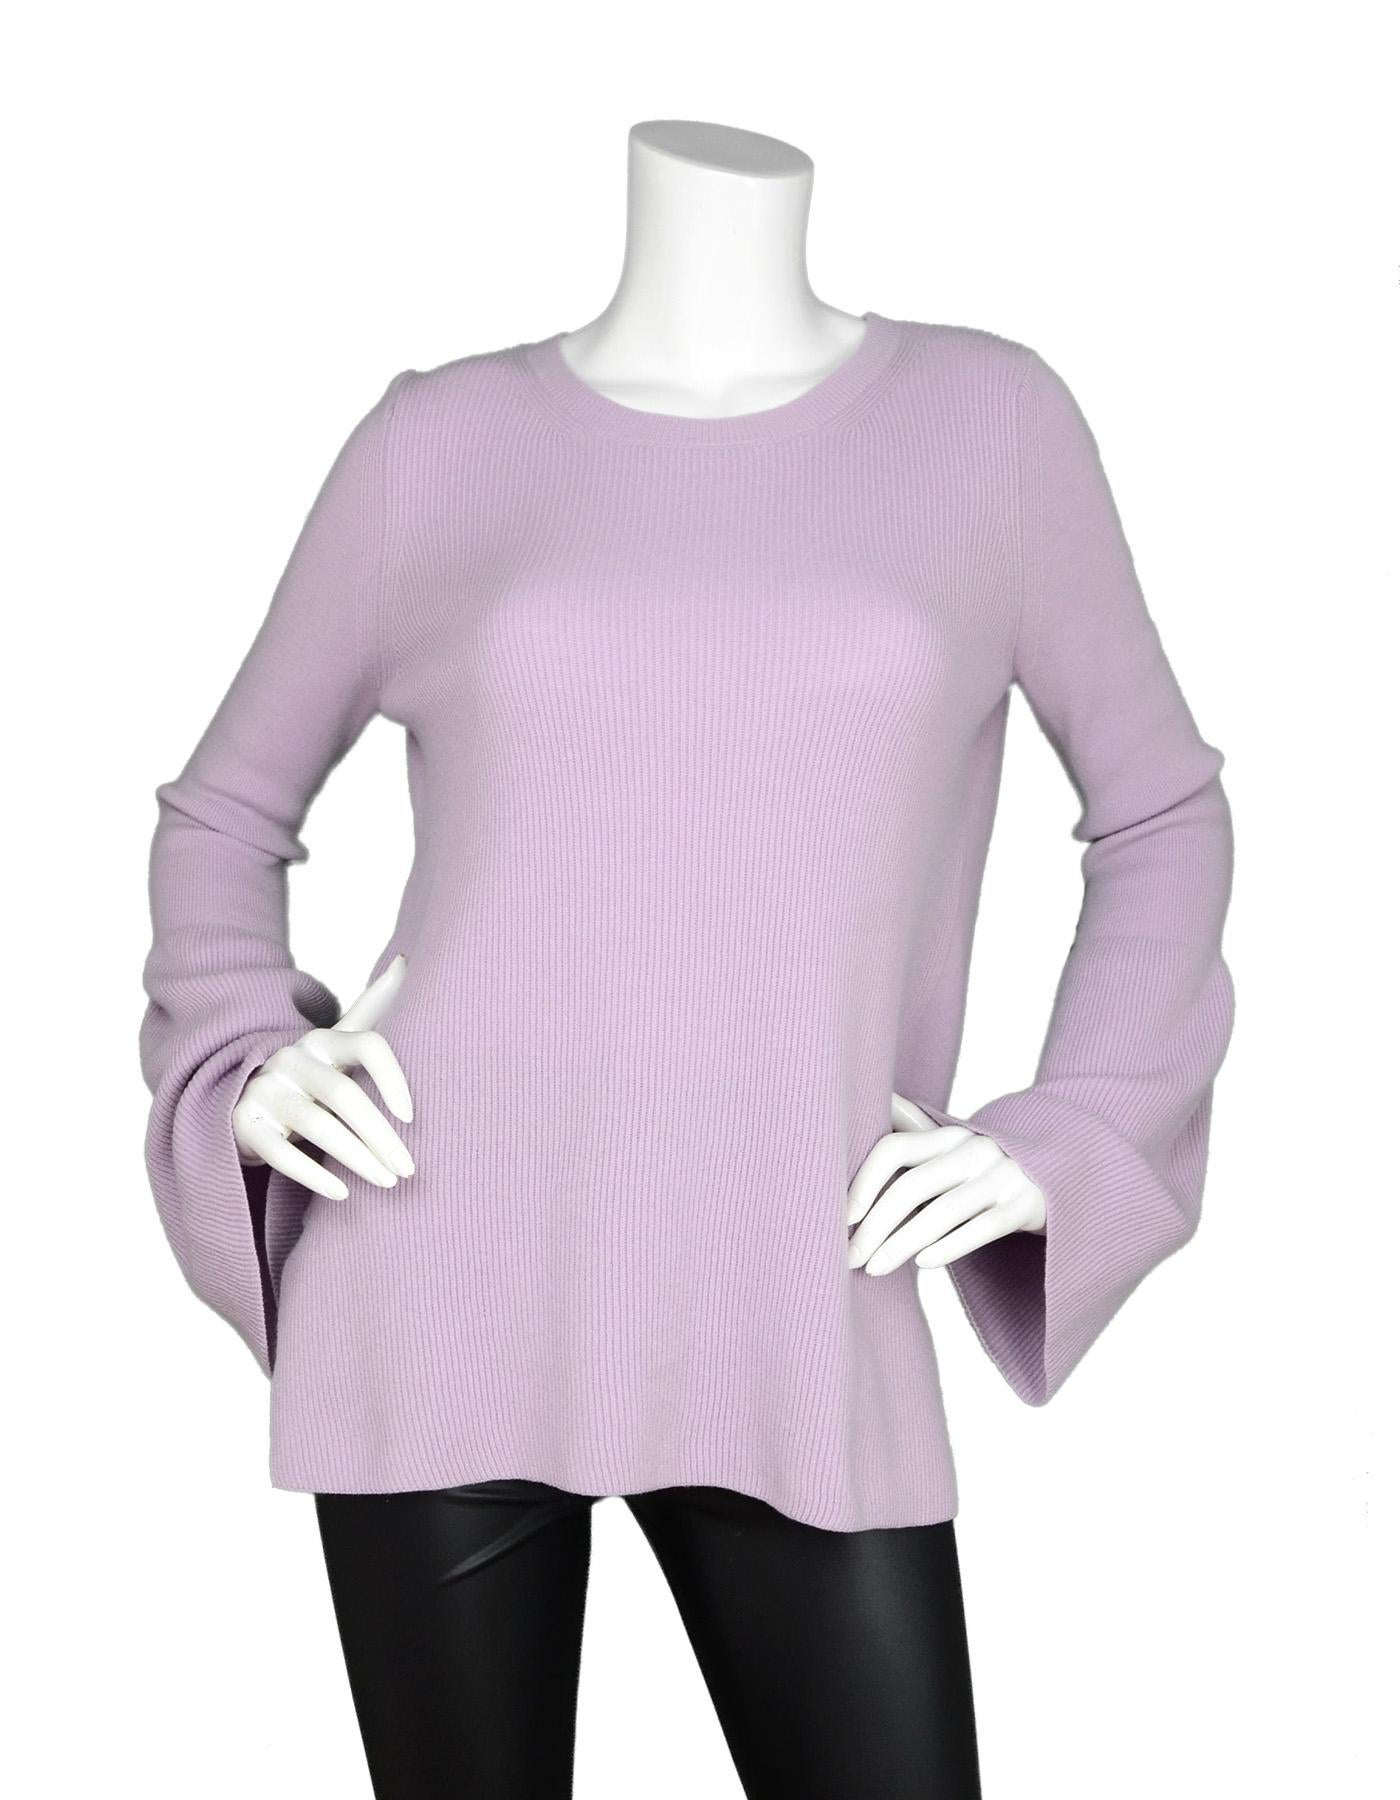 Stella McCartney NWT Lavender Wool High Low Rib Knit Sweater W/ Bell Sleeves Sz 42

Made In: Italy
Color: Lavender
Materials: 100% wool
Opening/Closure: Pullover
Overall Condition: New with tags condition 
Estimated Retail: $750 + tax
Includes: